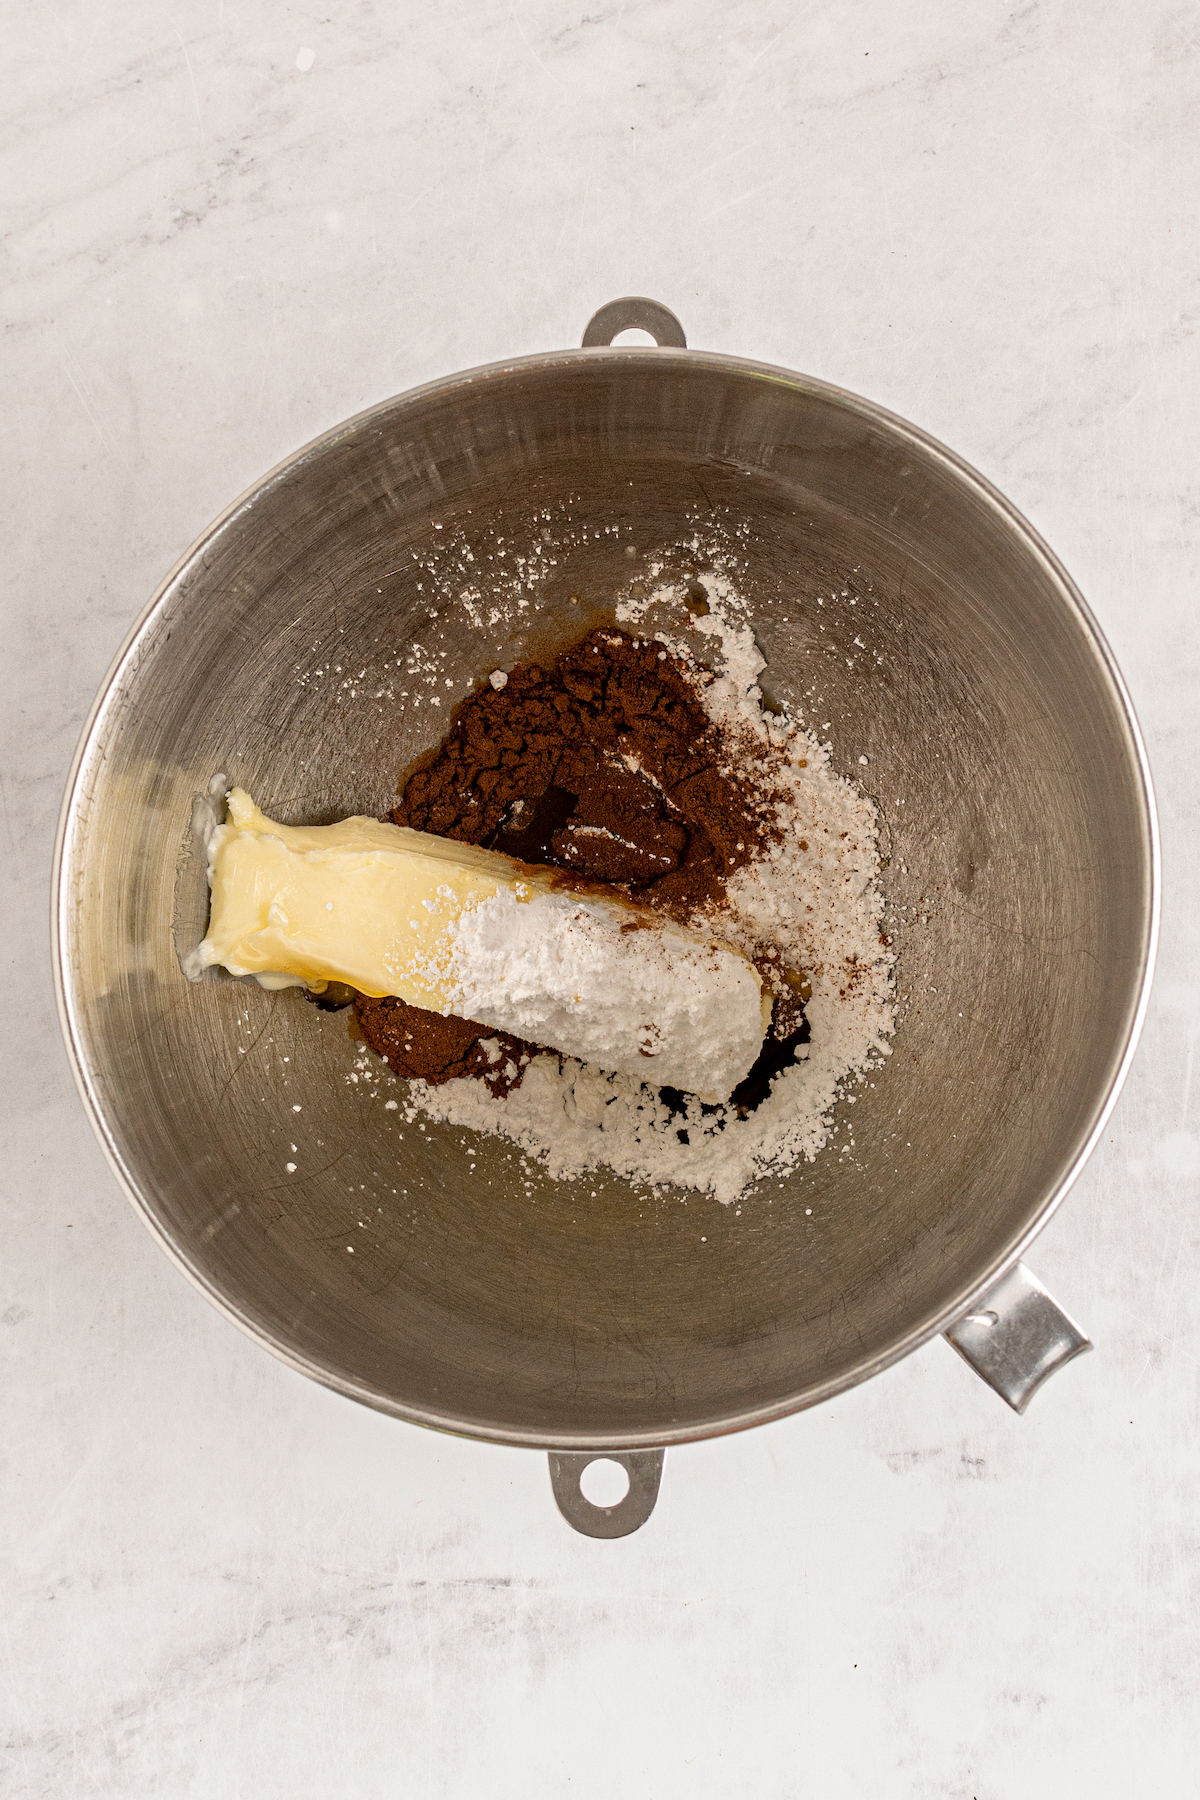 Cinnamon honey butter ingredients in a mixing bowl.